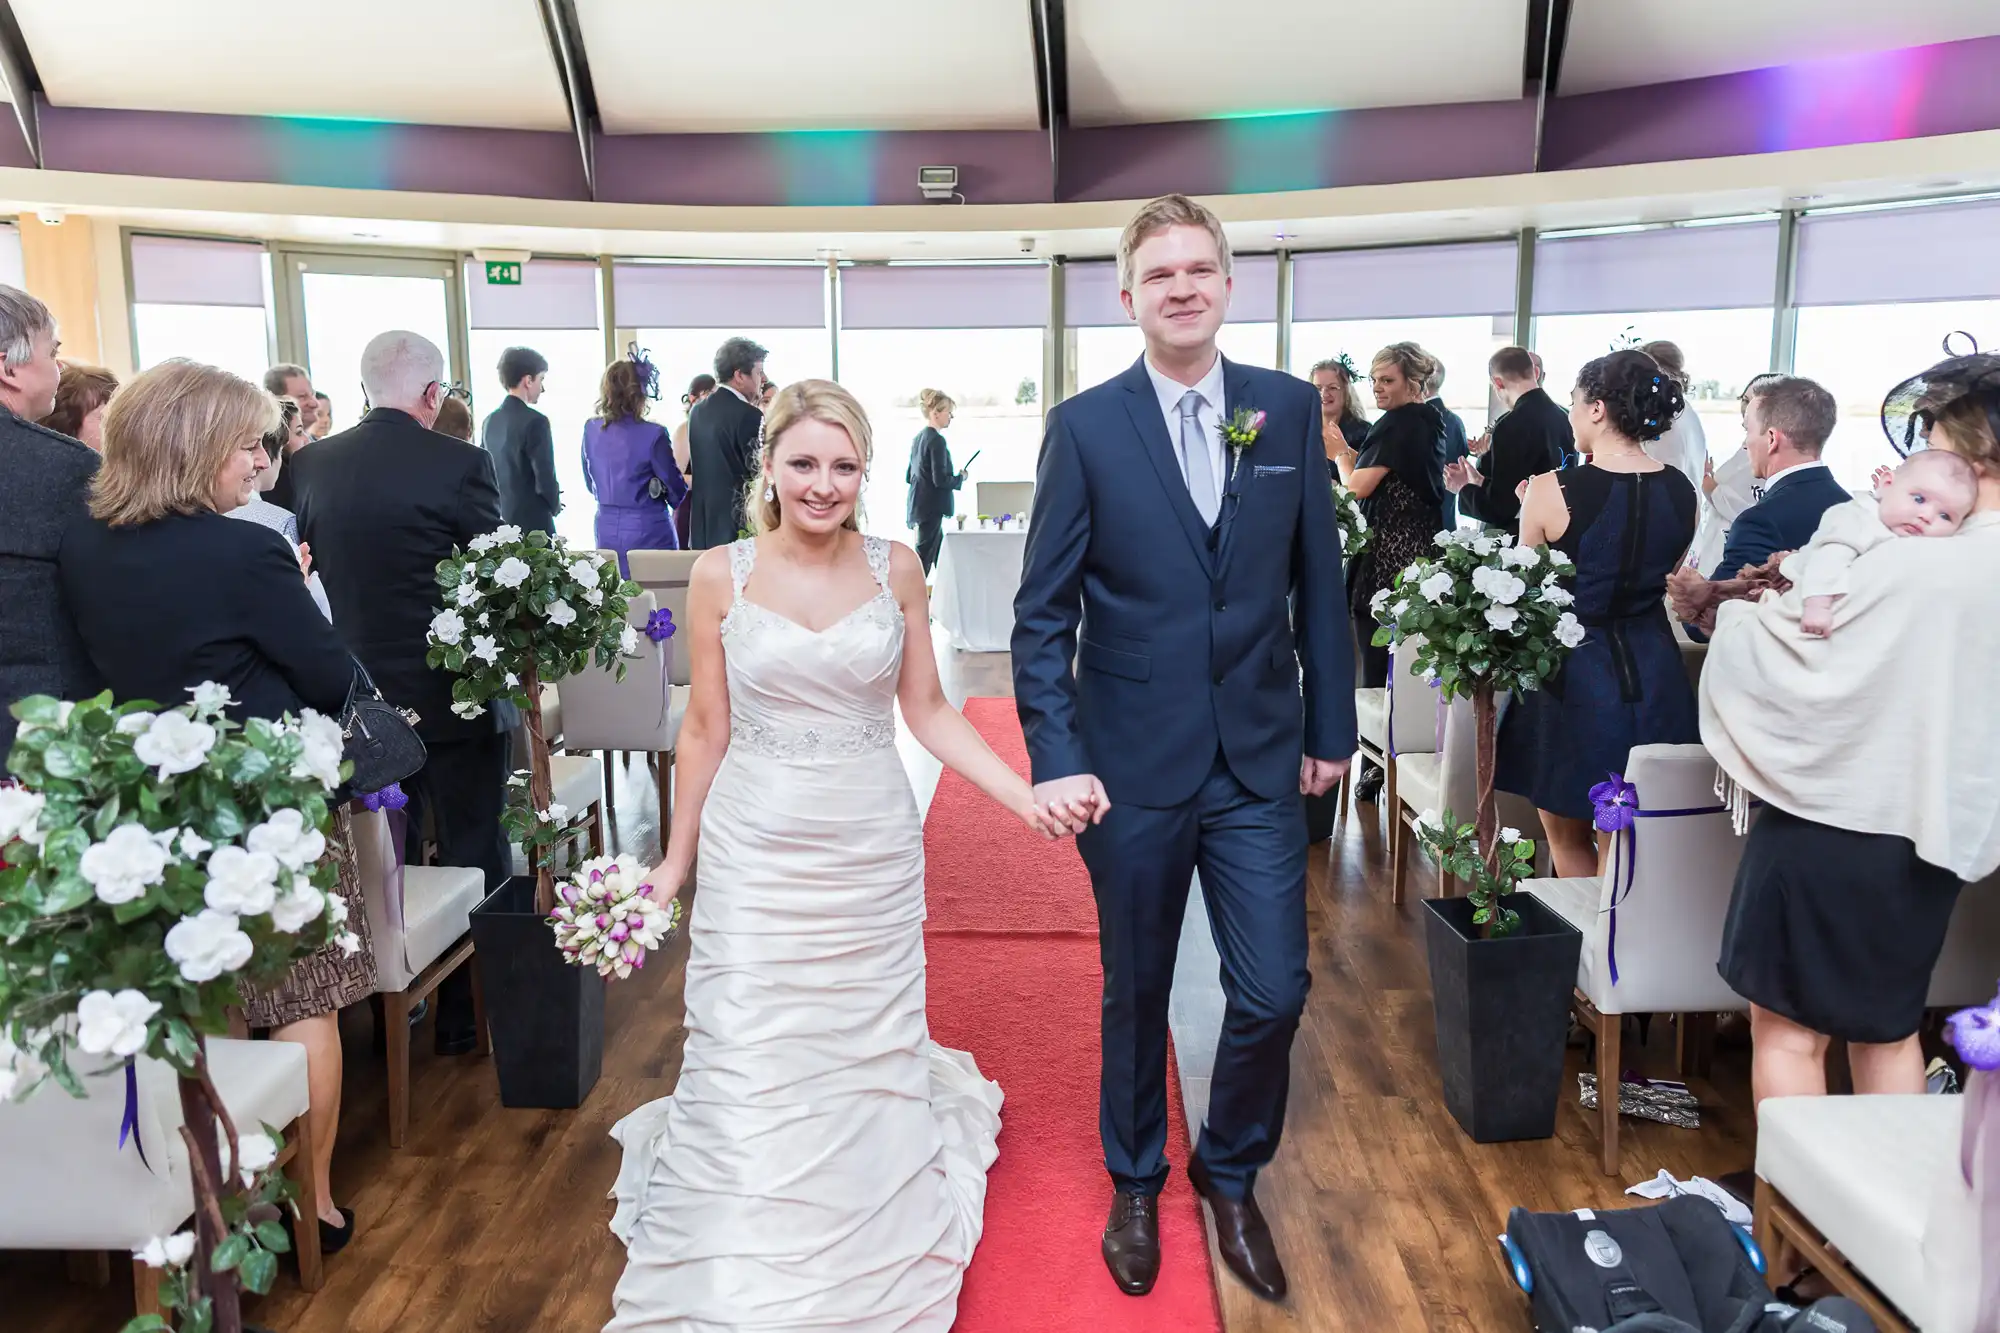 A bride and groom holding hands, smiling as they walk down the aisle in a room with guests standing around them.